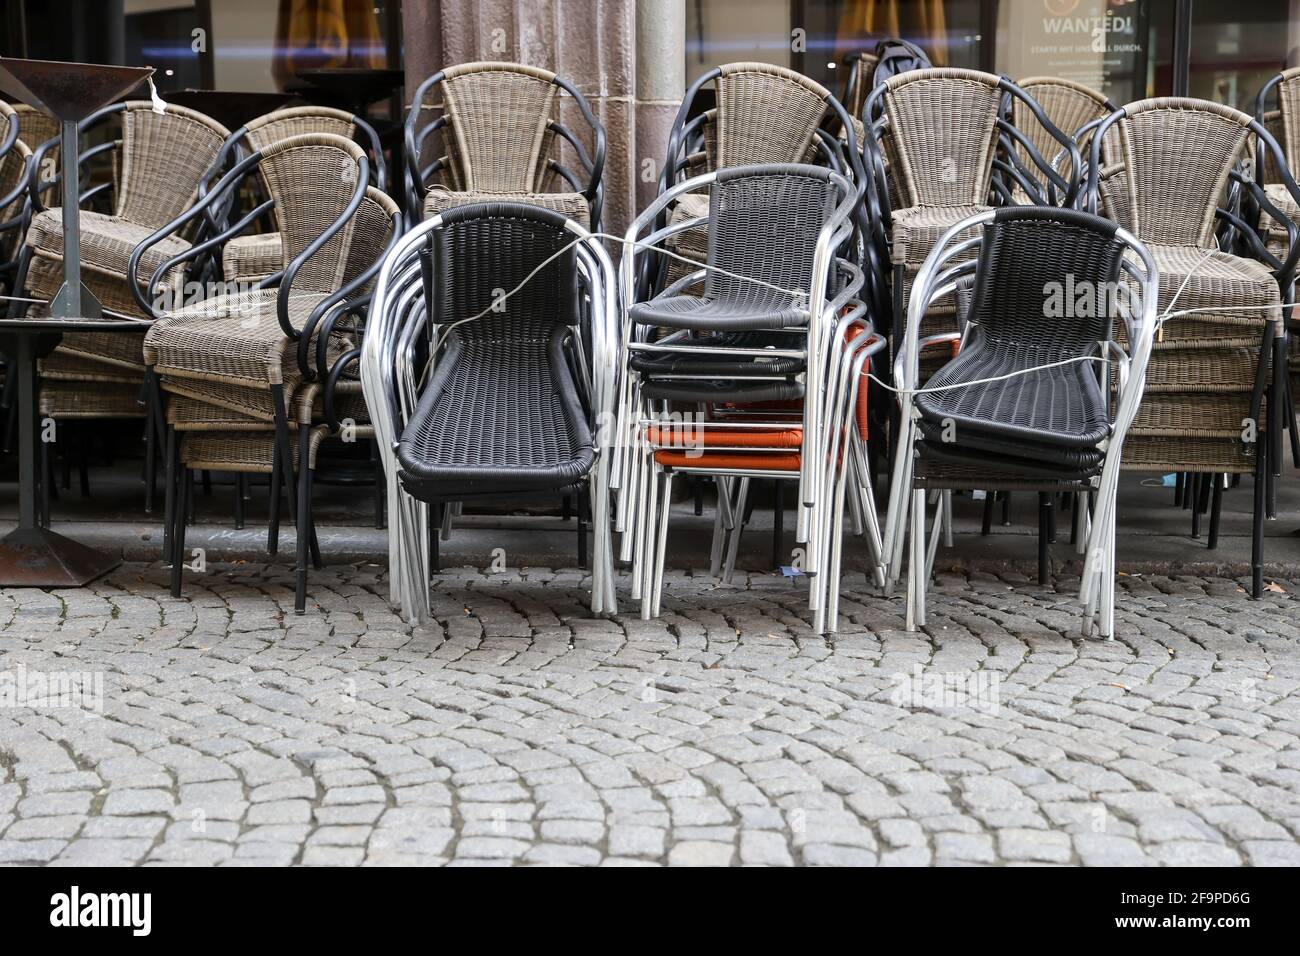 Leipzig, Germany. 15th Apr, 2021. Chairs and other outdoor furniture are stacked tightly at the edge of the pub mile 'Barfußgäßchen'. The otherwise overflowing with people is deserted during the corona-related closure of the gastronomy. Credit: Jan Woitas/dpa-Zentralbild/ZB/dpa/Alamy Live News Stock Photo